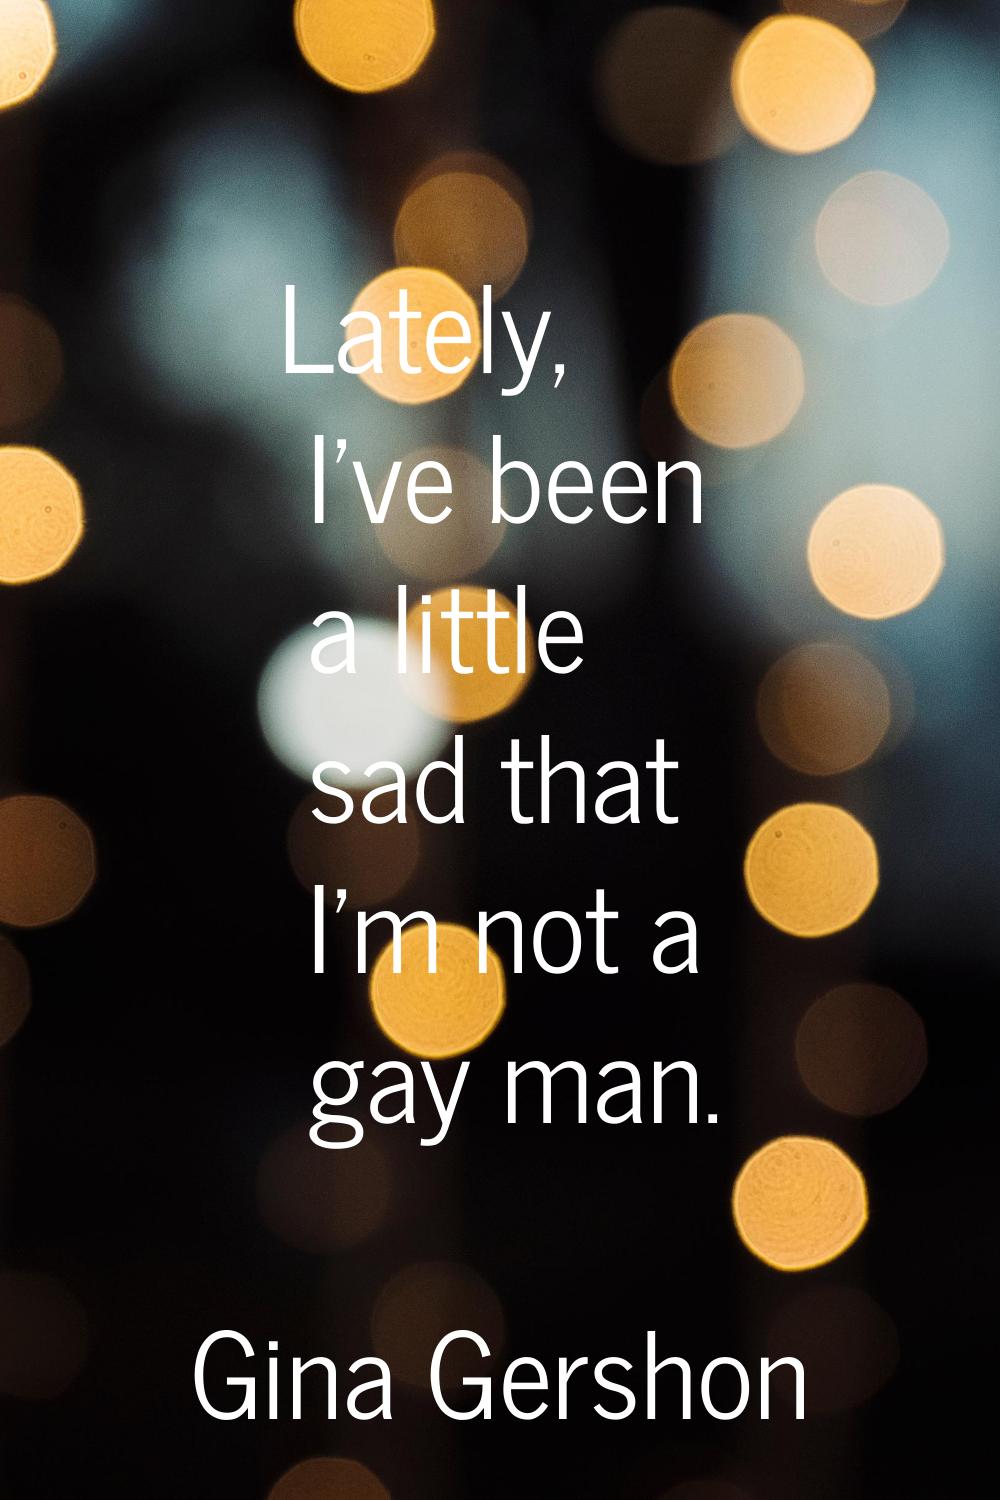 Lately, I've been a little sad that I'm not a gay man.